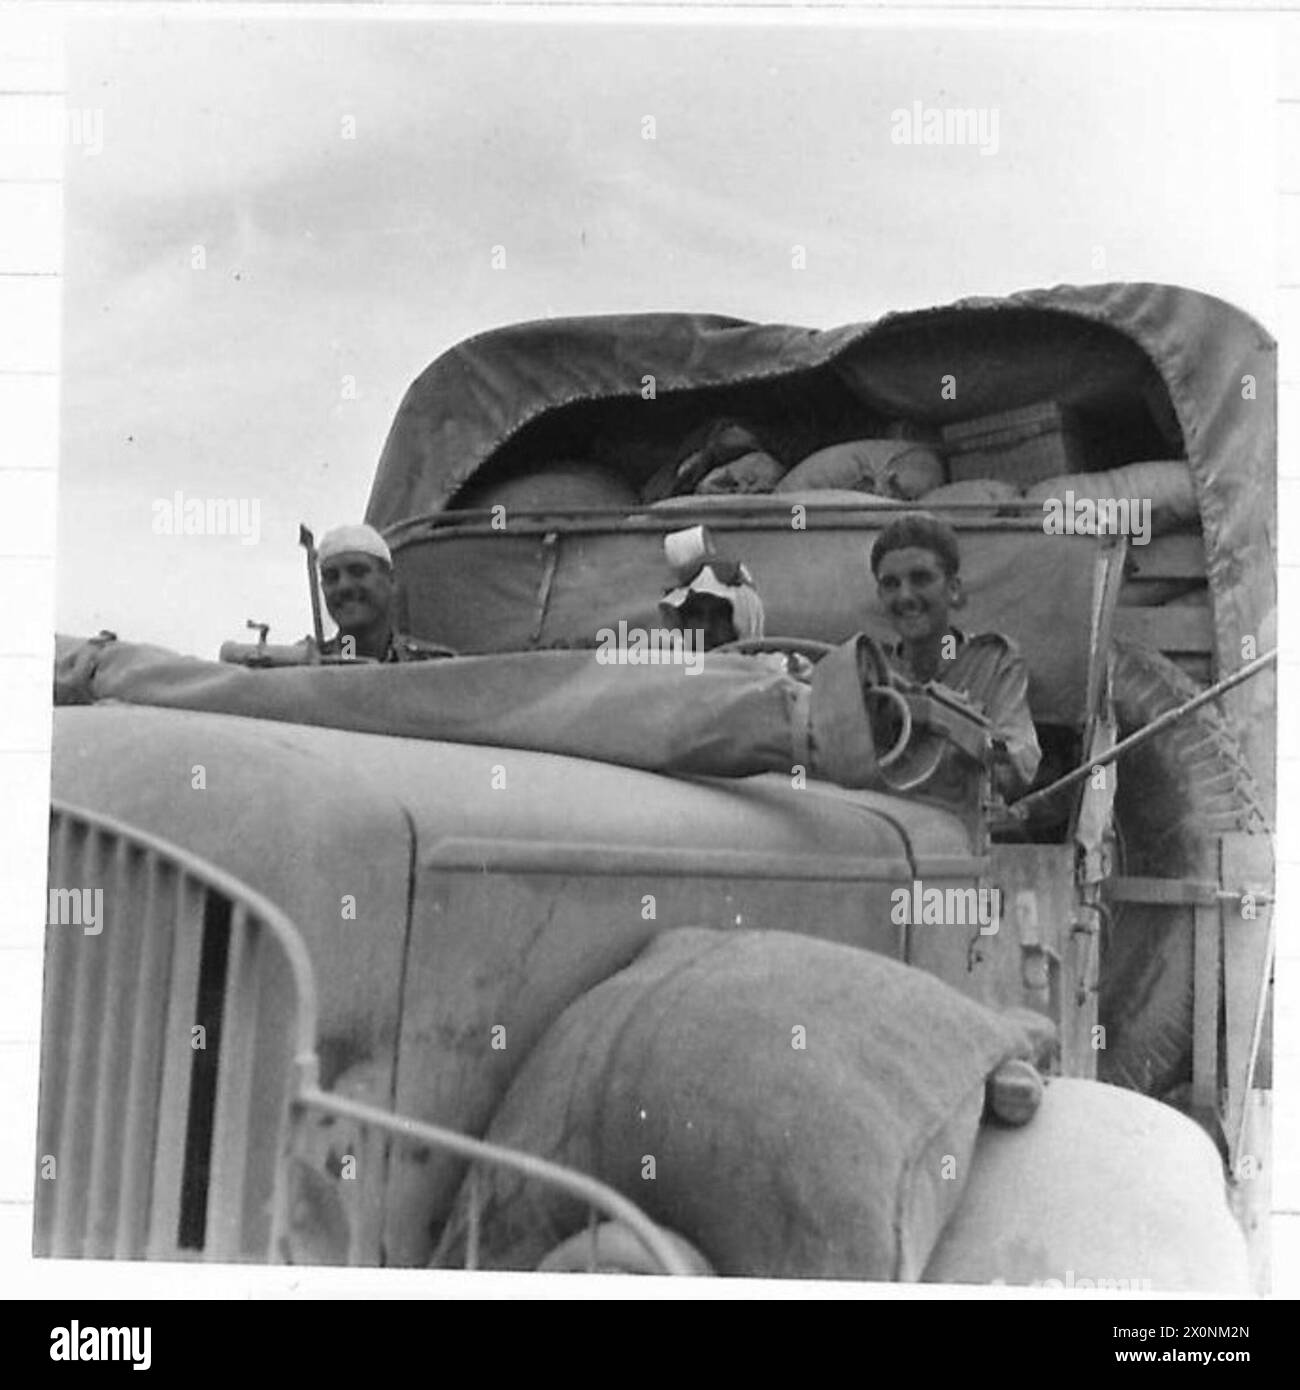 ALLIED TROOPS TRAVEL THREE MILLION MILES KILLING LOCUSTS - A ten-ton lorry in convoy on the road to Hail. Left to right are:-L/Cpl. A Houghton of 289 Stratford Road, BirminghamMohamed, a Saudi Arabian guideDvr. R. Knights of 202 Clapham Road, Stockwell, London S.W.9 , United Nations Organisation [UNO] Stock Photo